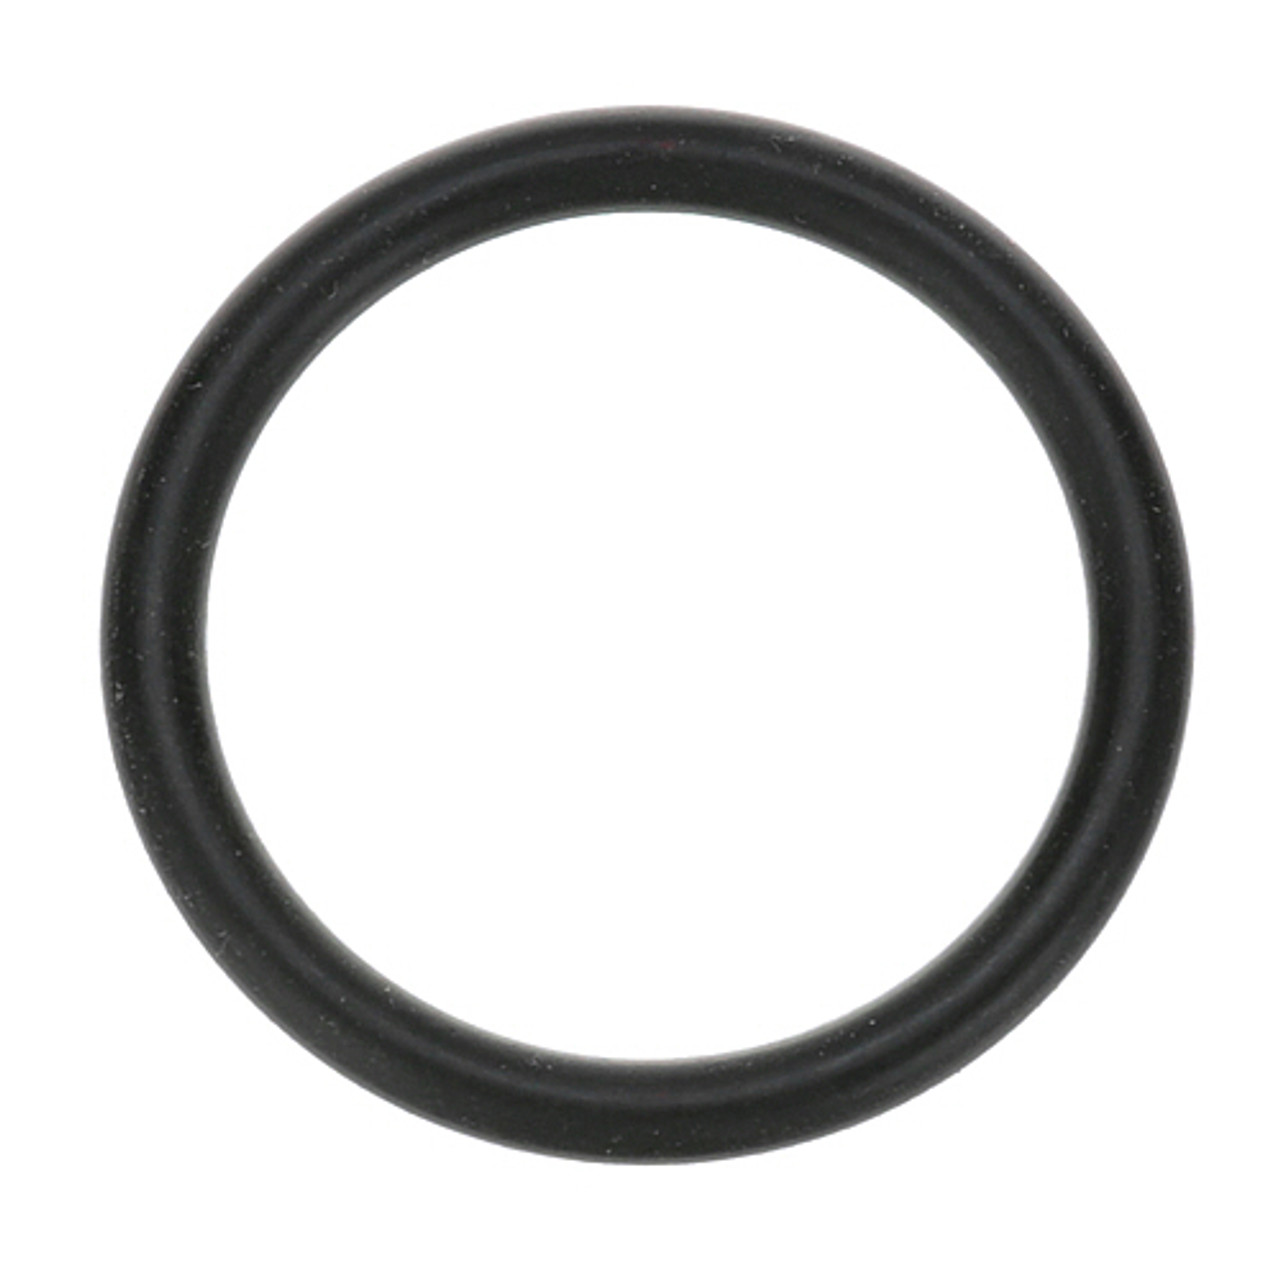 O-Ring 1-1/8" Id X 1/8" Width - Replacement Part For Hobart 67500-00012